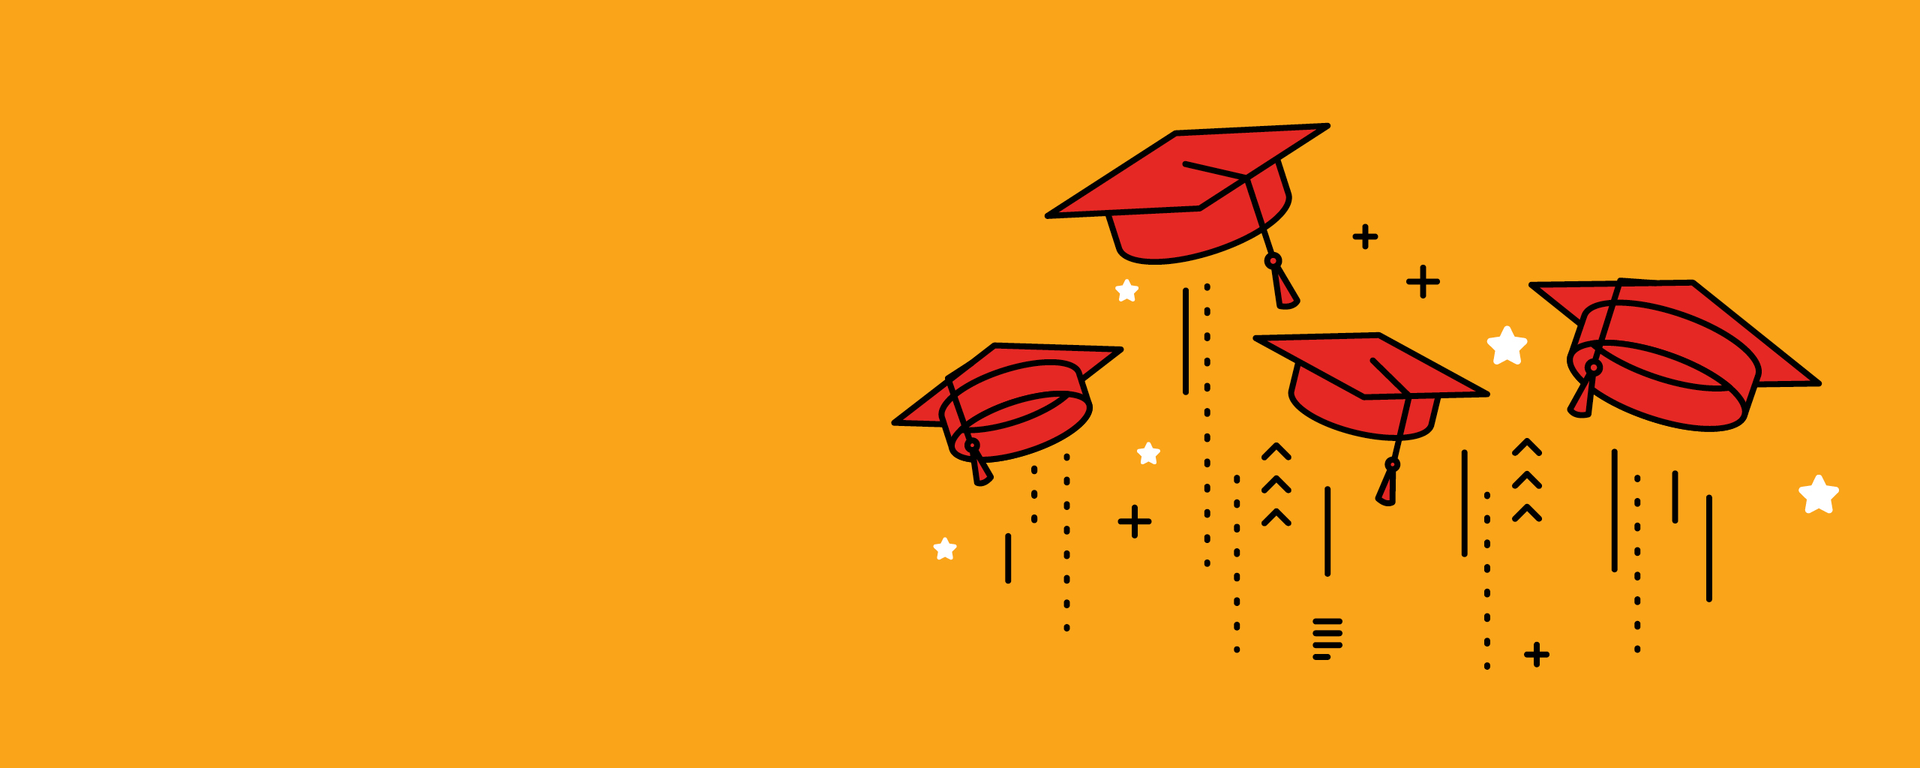 A graphic of red graduation caps